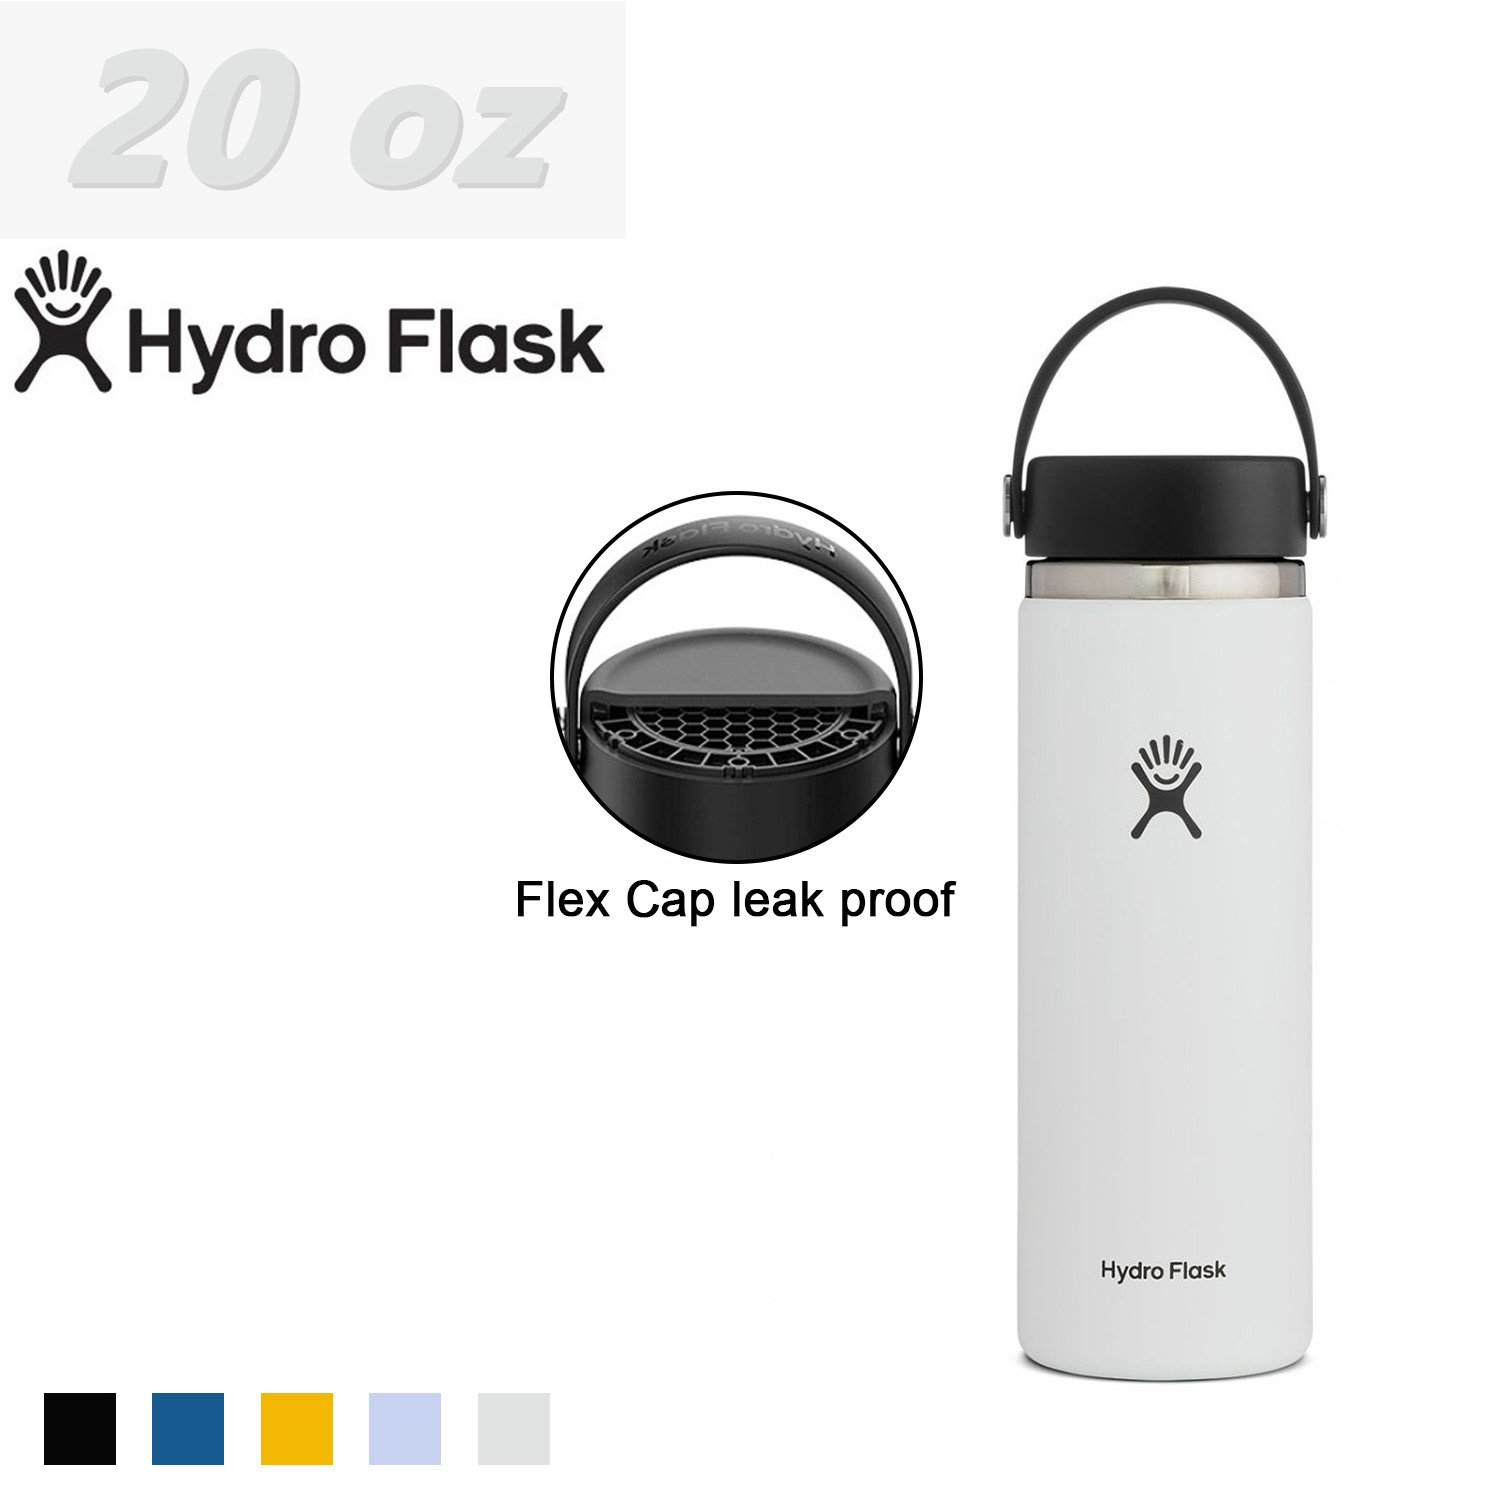 Why Does My Hydro Flask Stop Working? - China Stainless Steel